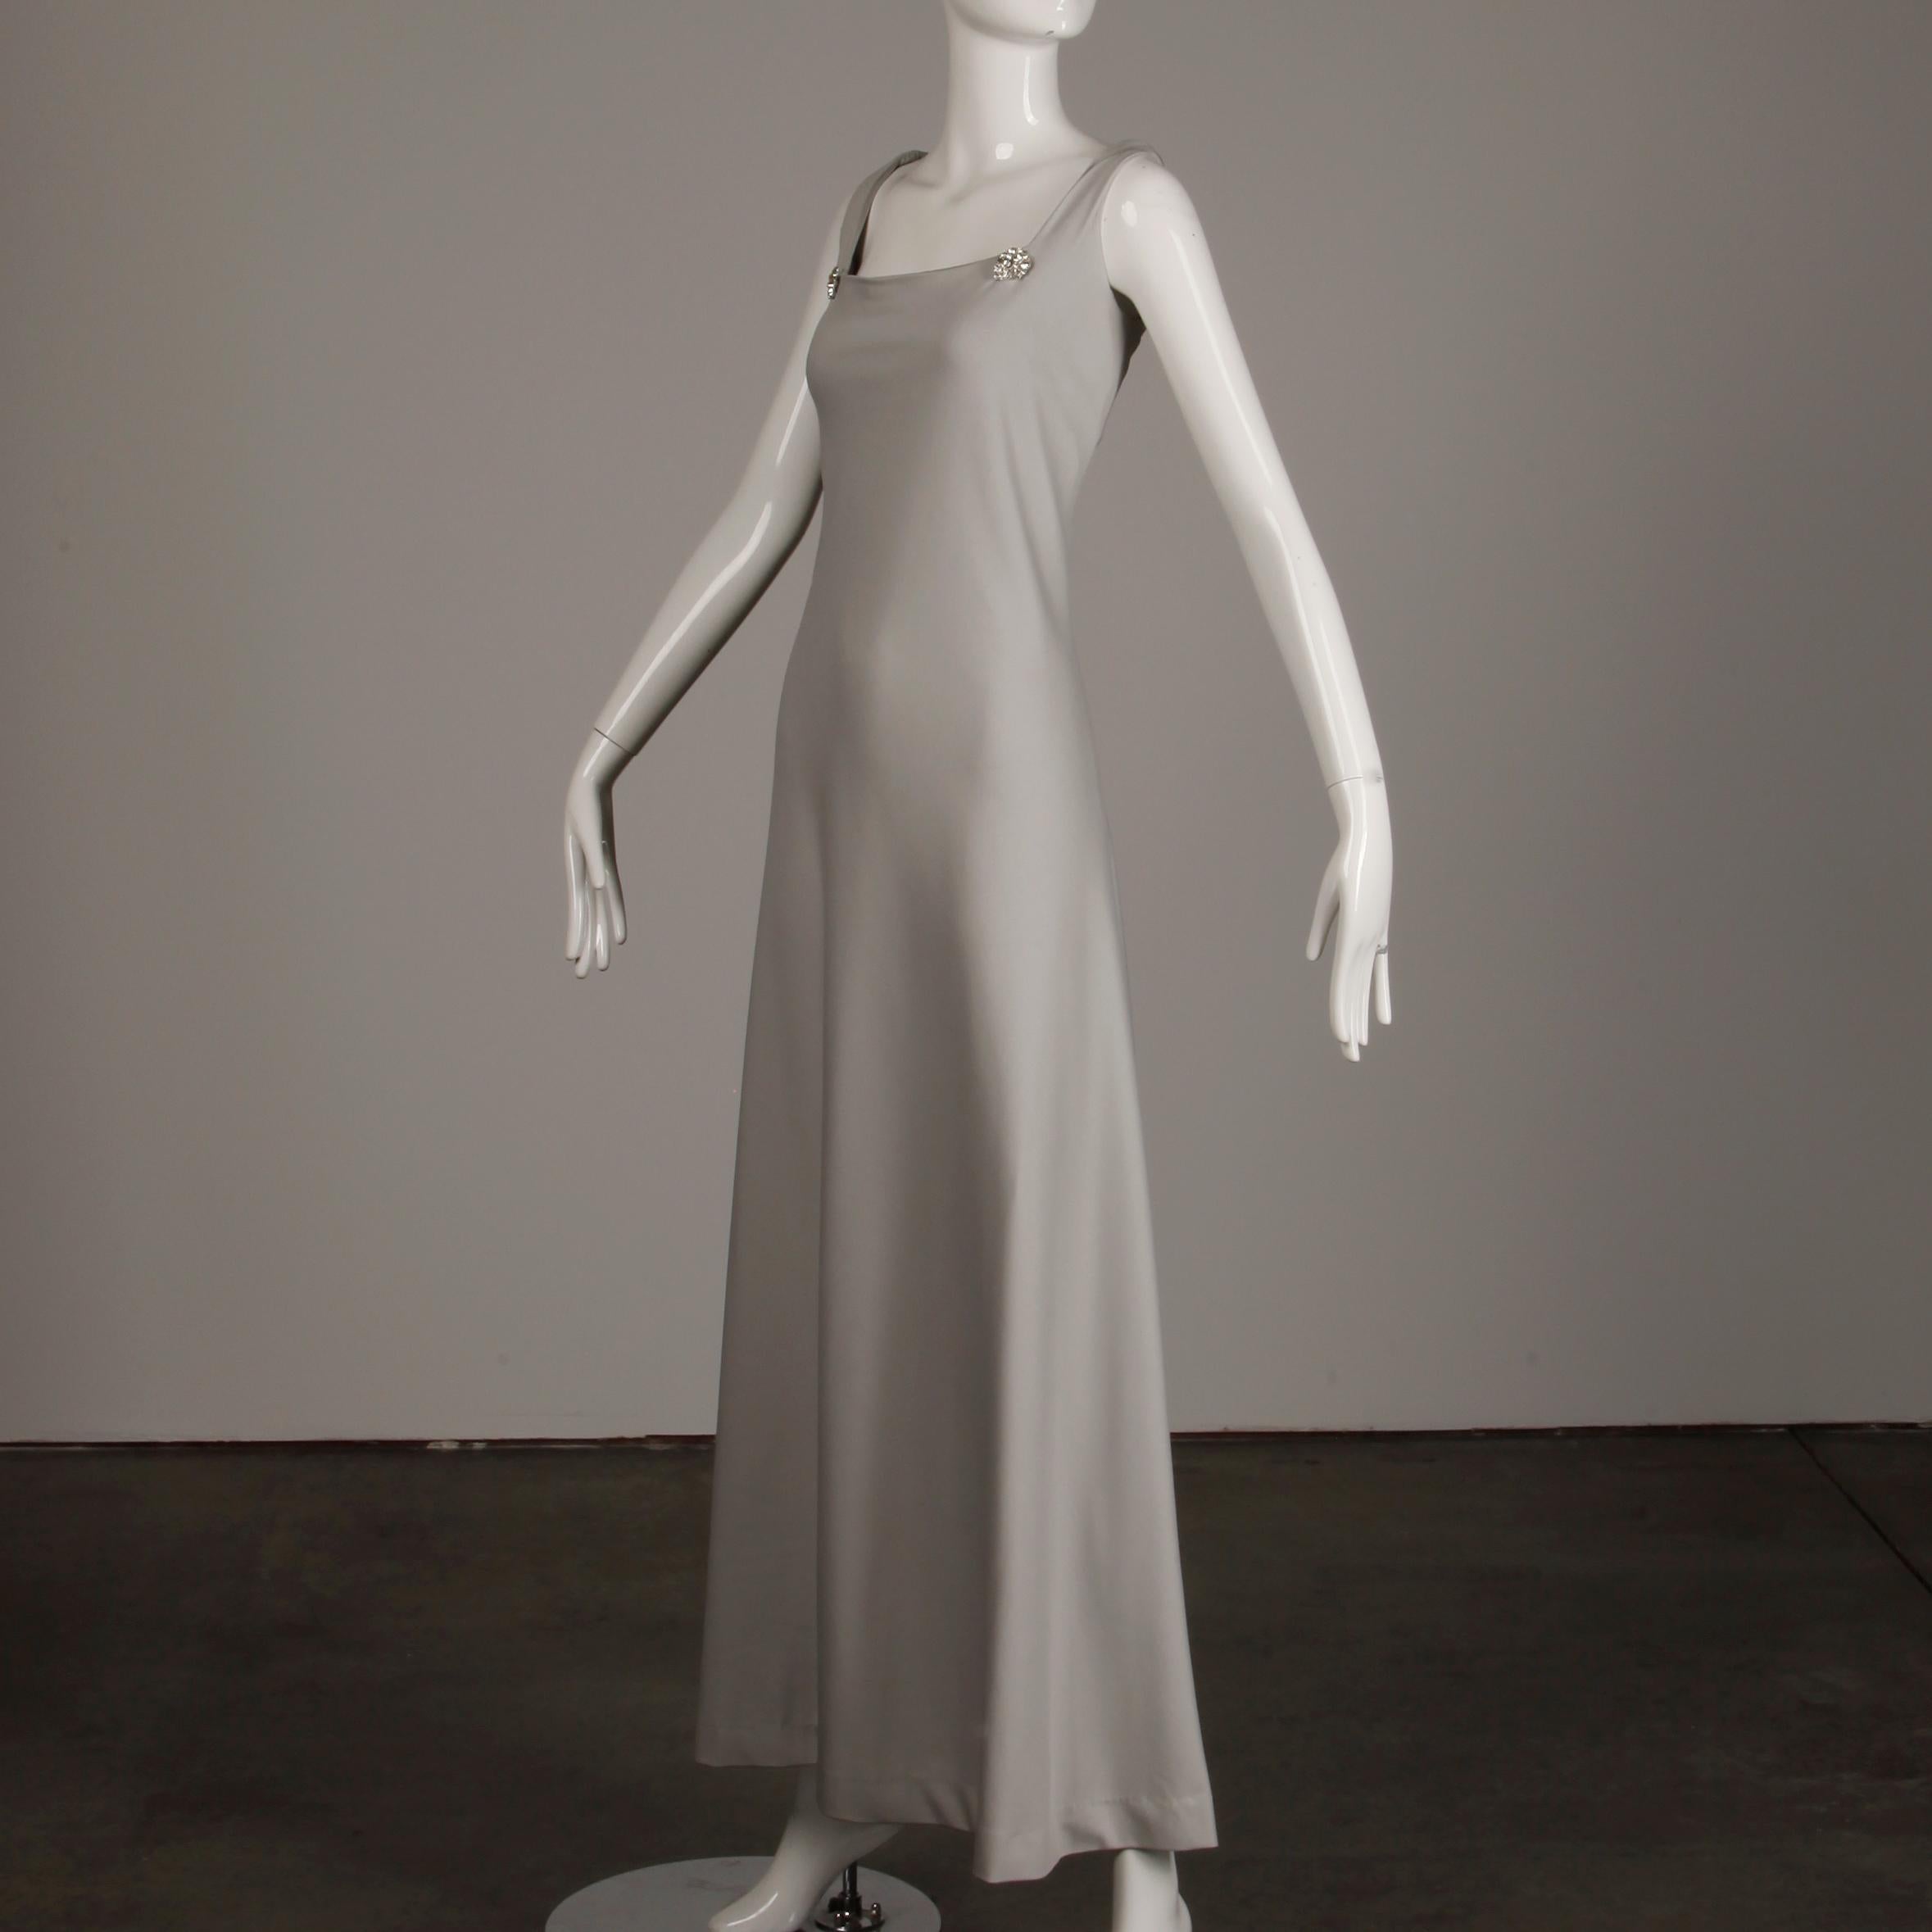 1970s Rona Vintage Gray Jersey Knit Dress/ Gown with Detachable Rhinestone Cape 3